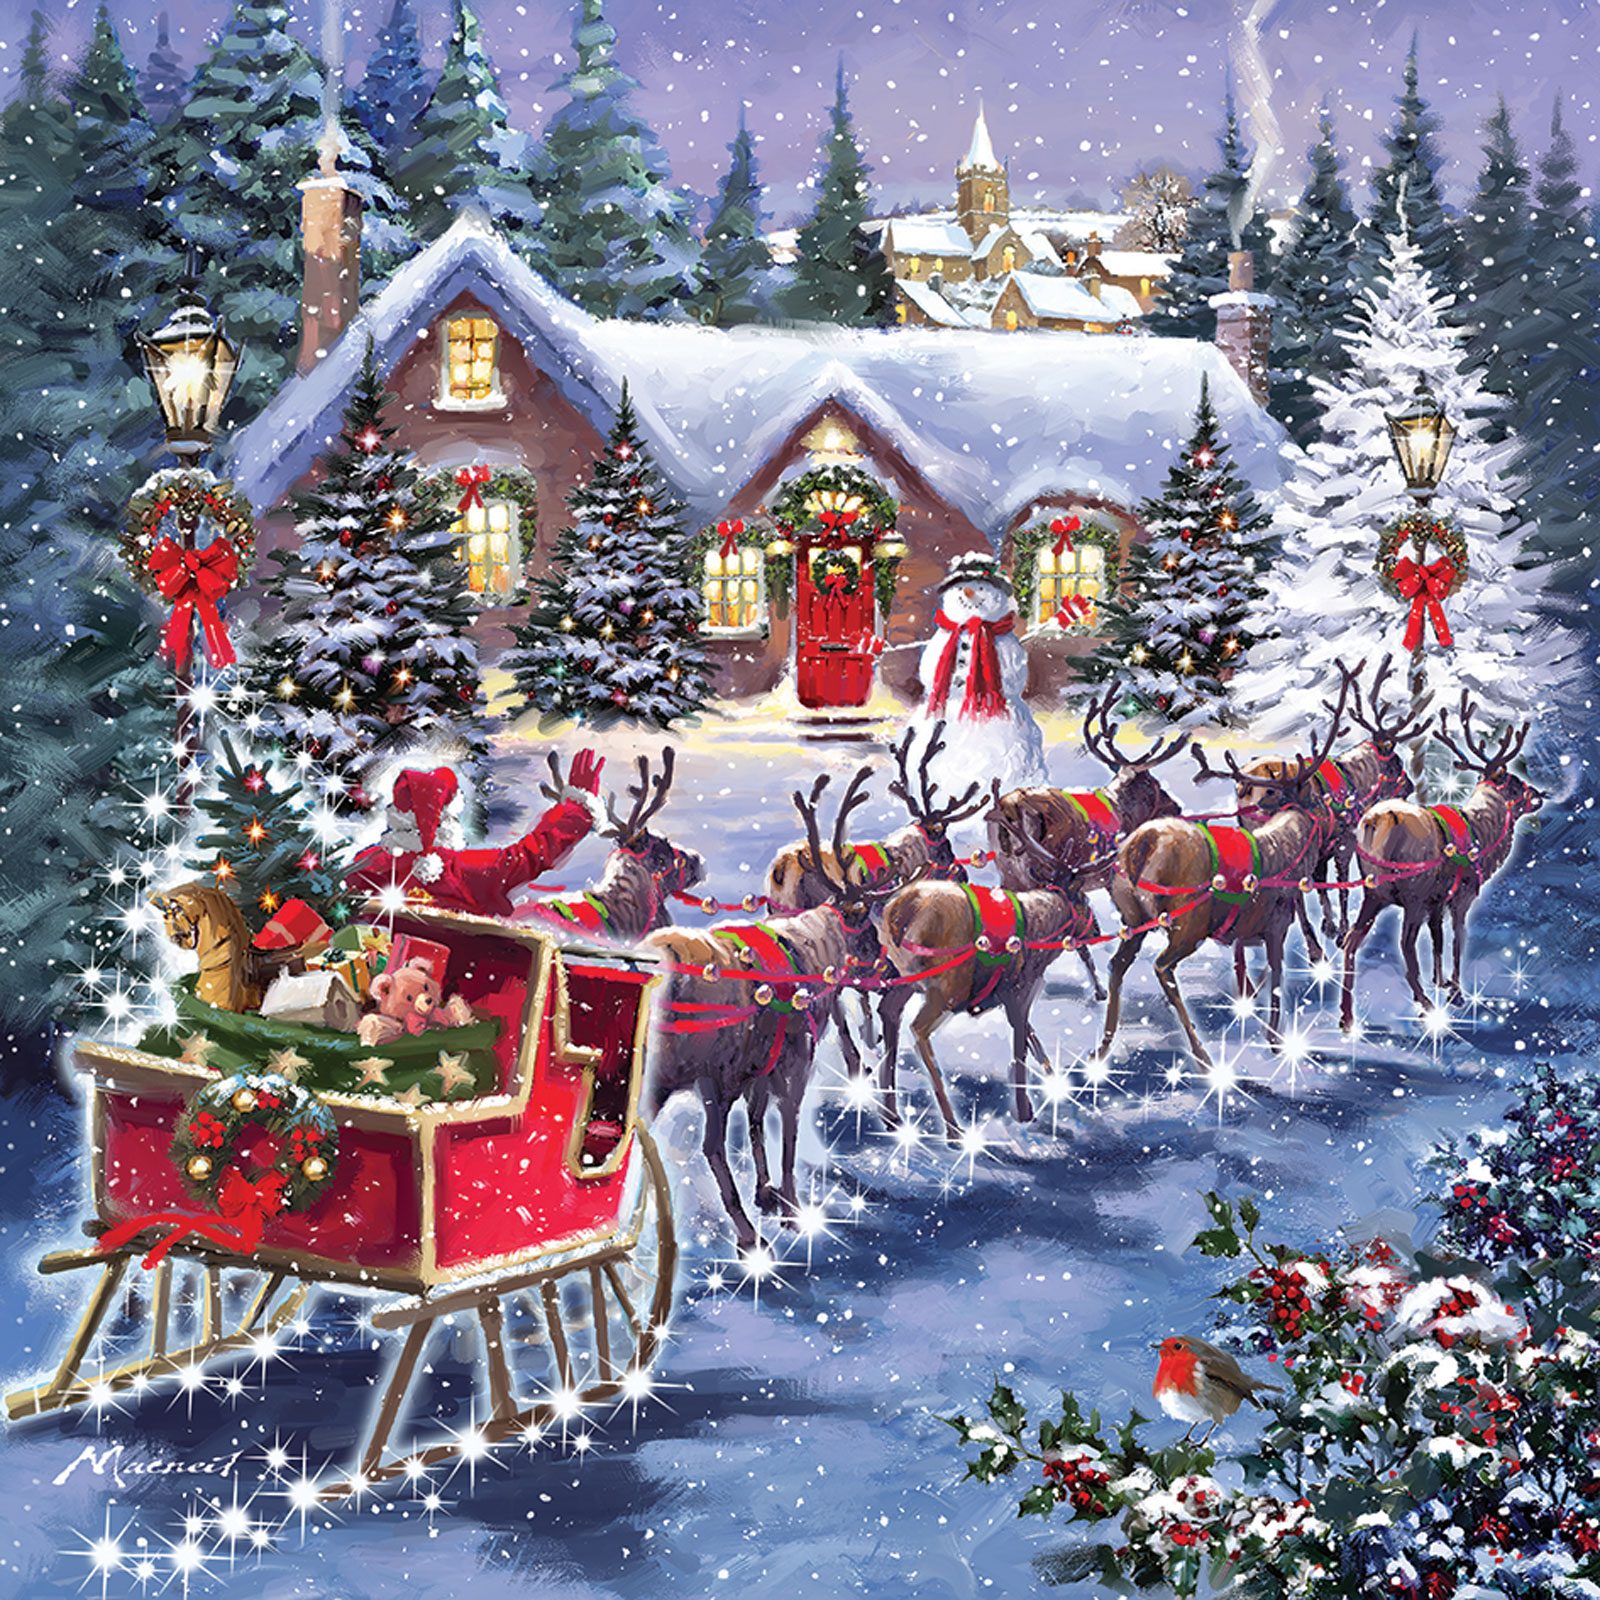 https://puzzlemania-154aa.kxcdn.com/products/2020/puzzle-otter-house-1000-pieces-santas-sleigh.jpg